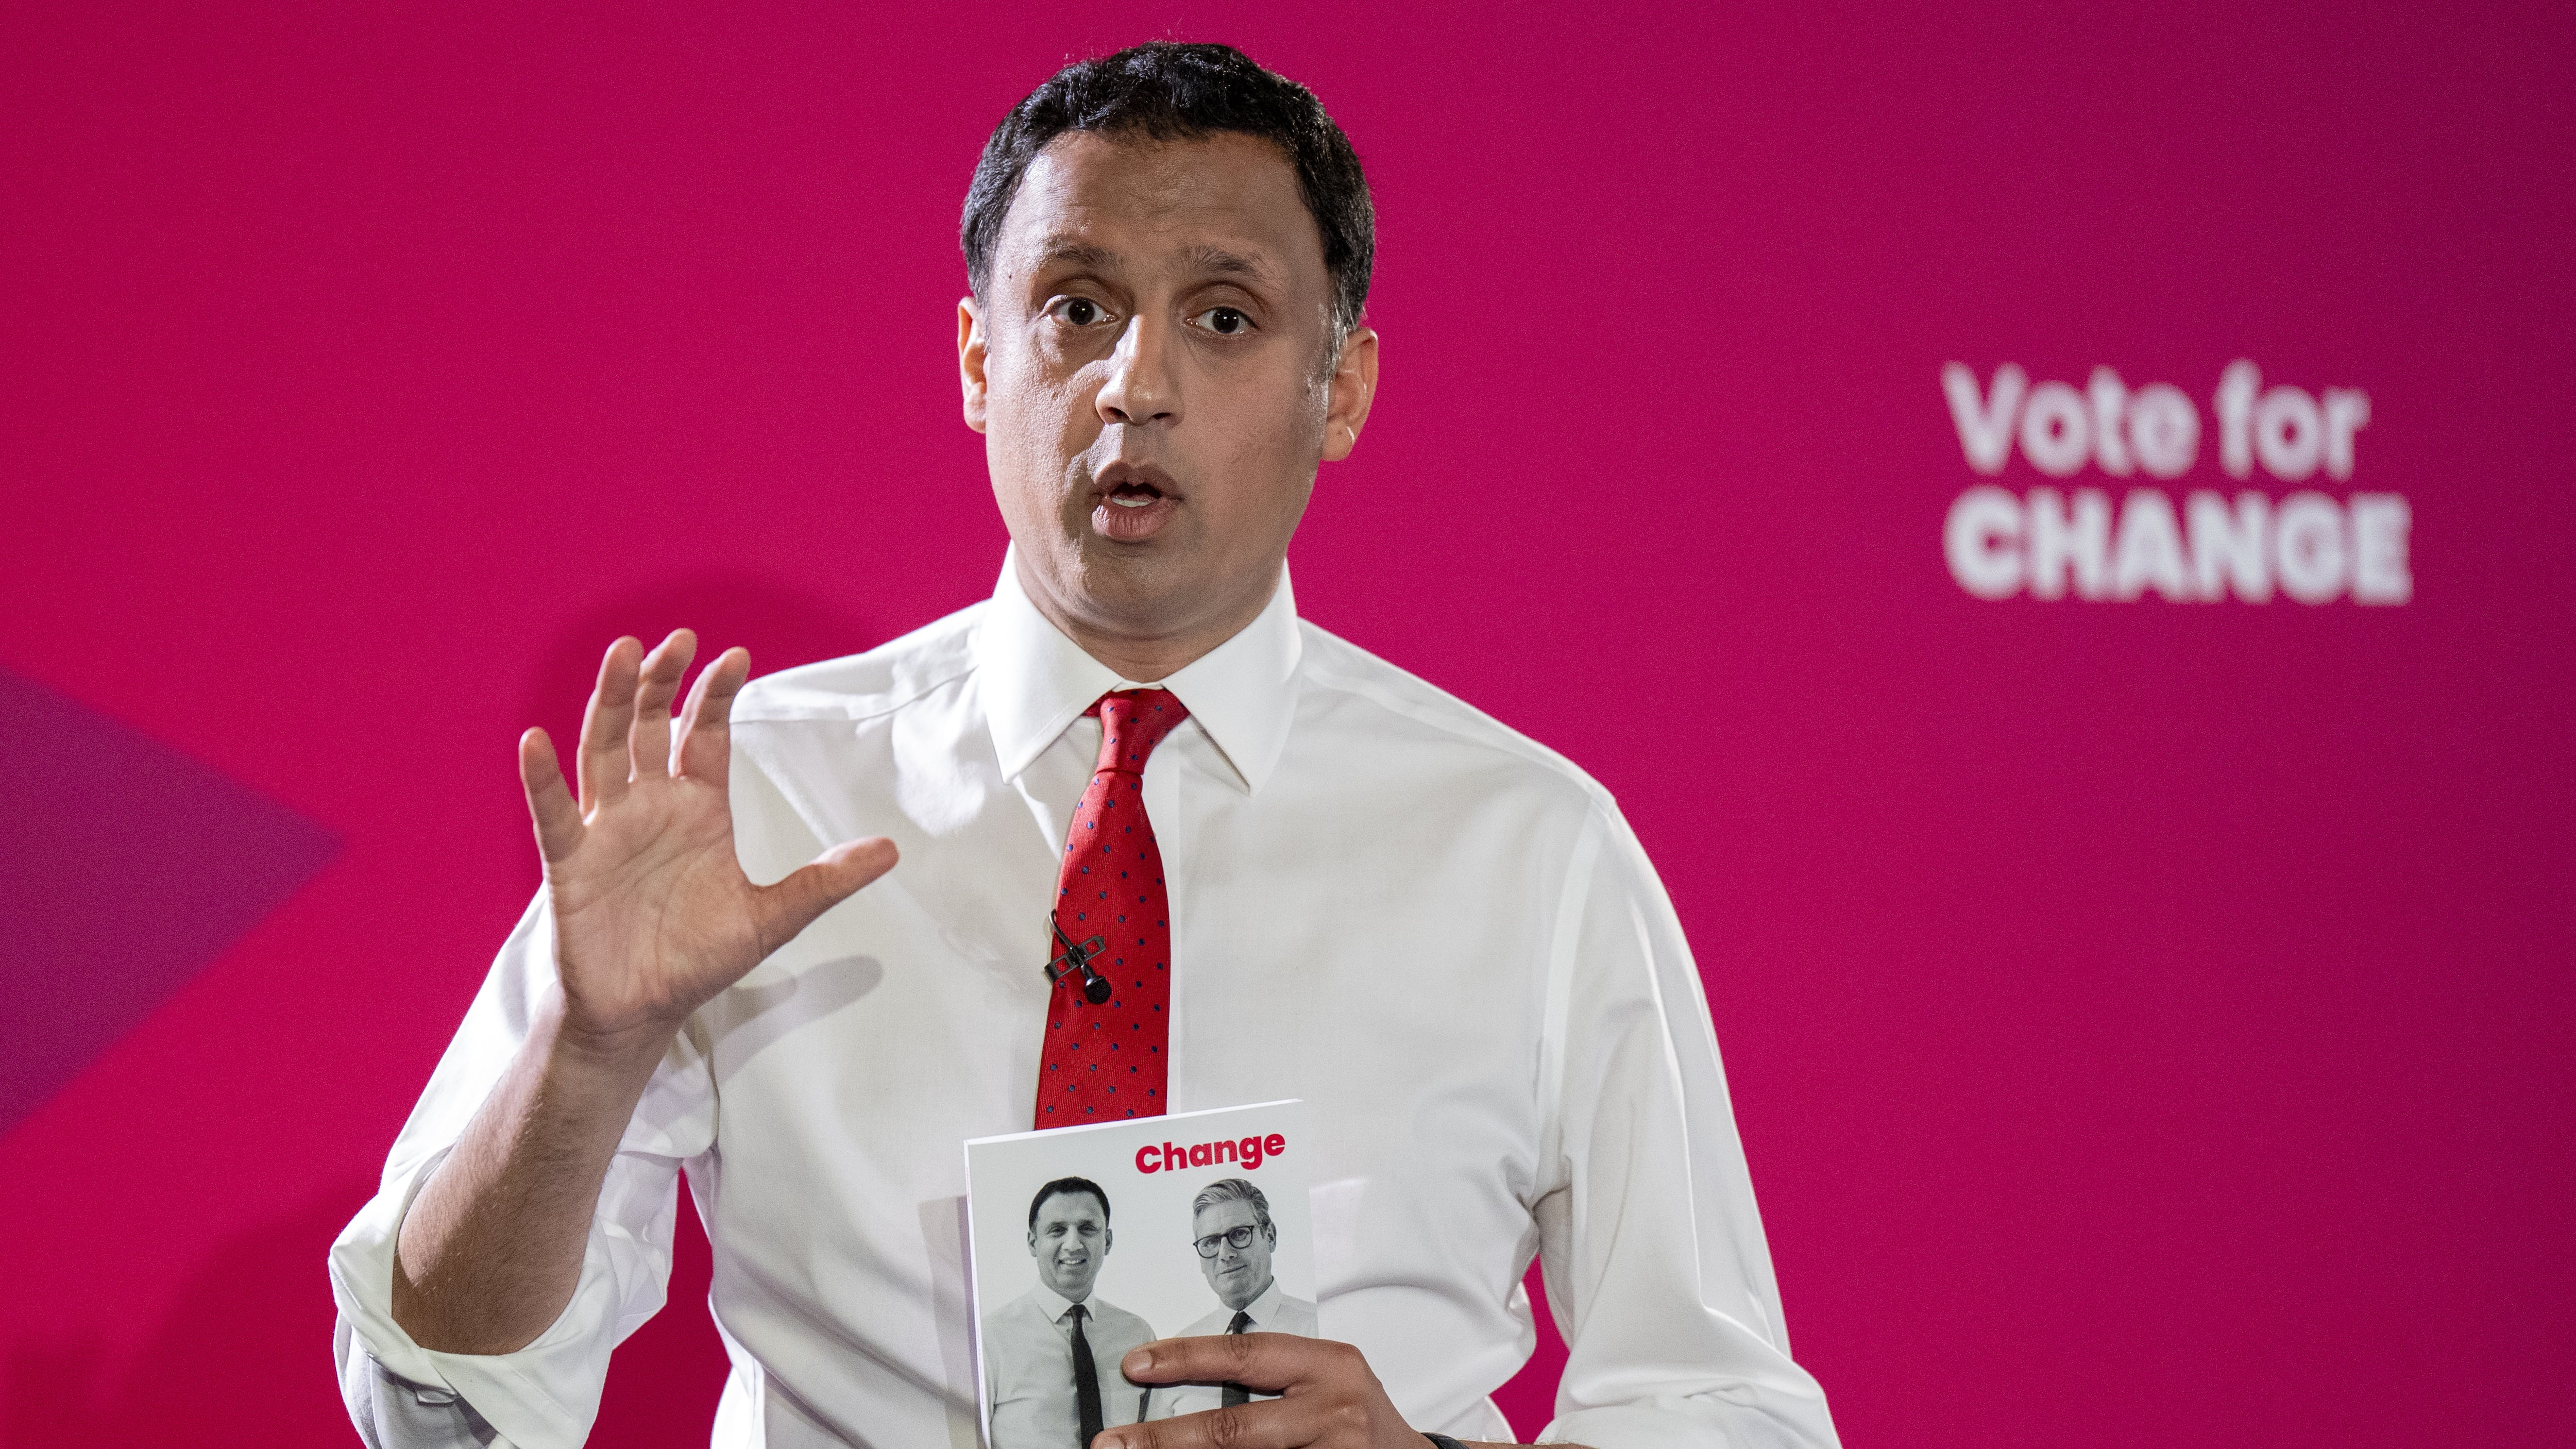 Scottish Labour leader Anas Sarwar has made his final push for votes